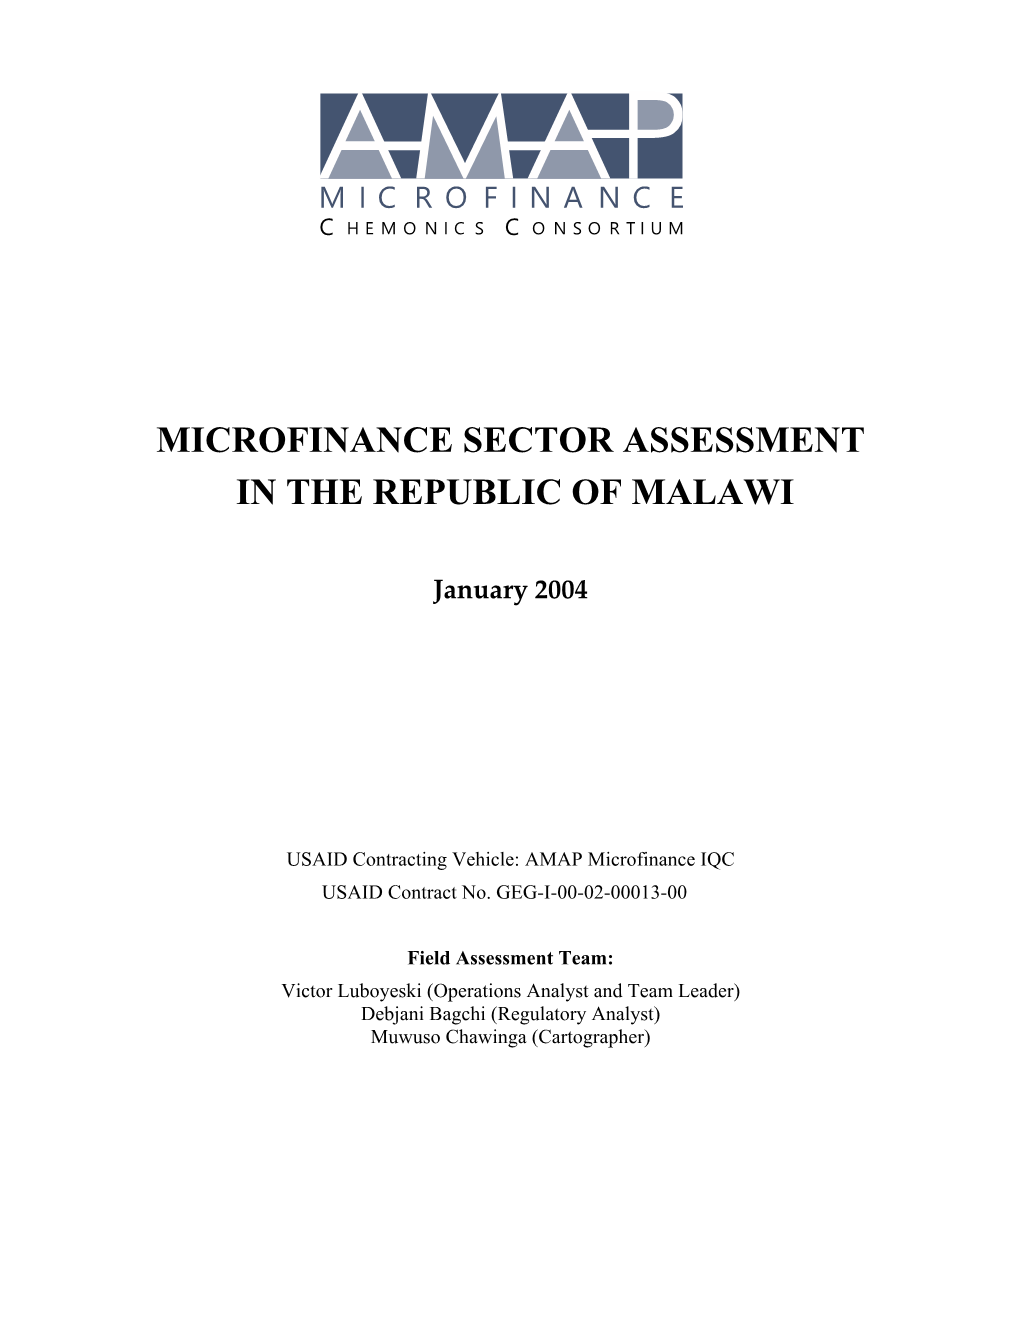 Microfinance Sector Assessment in the Republic of Malawi